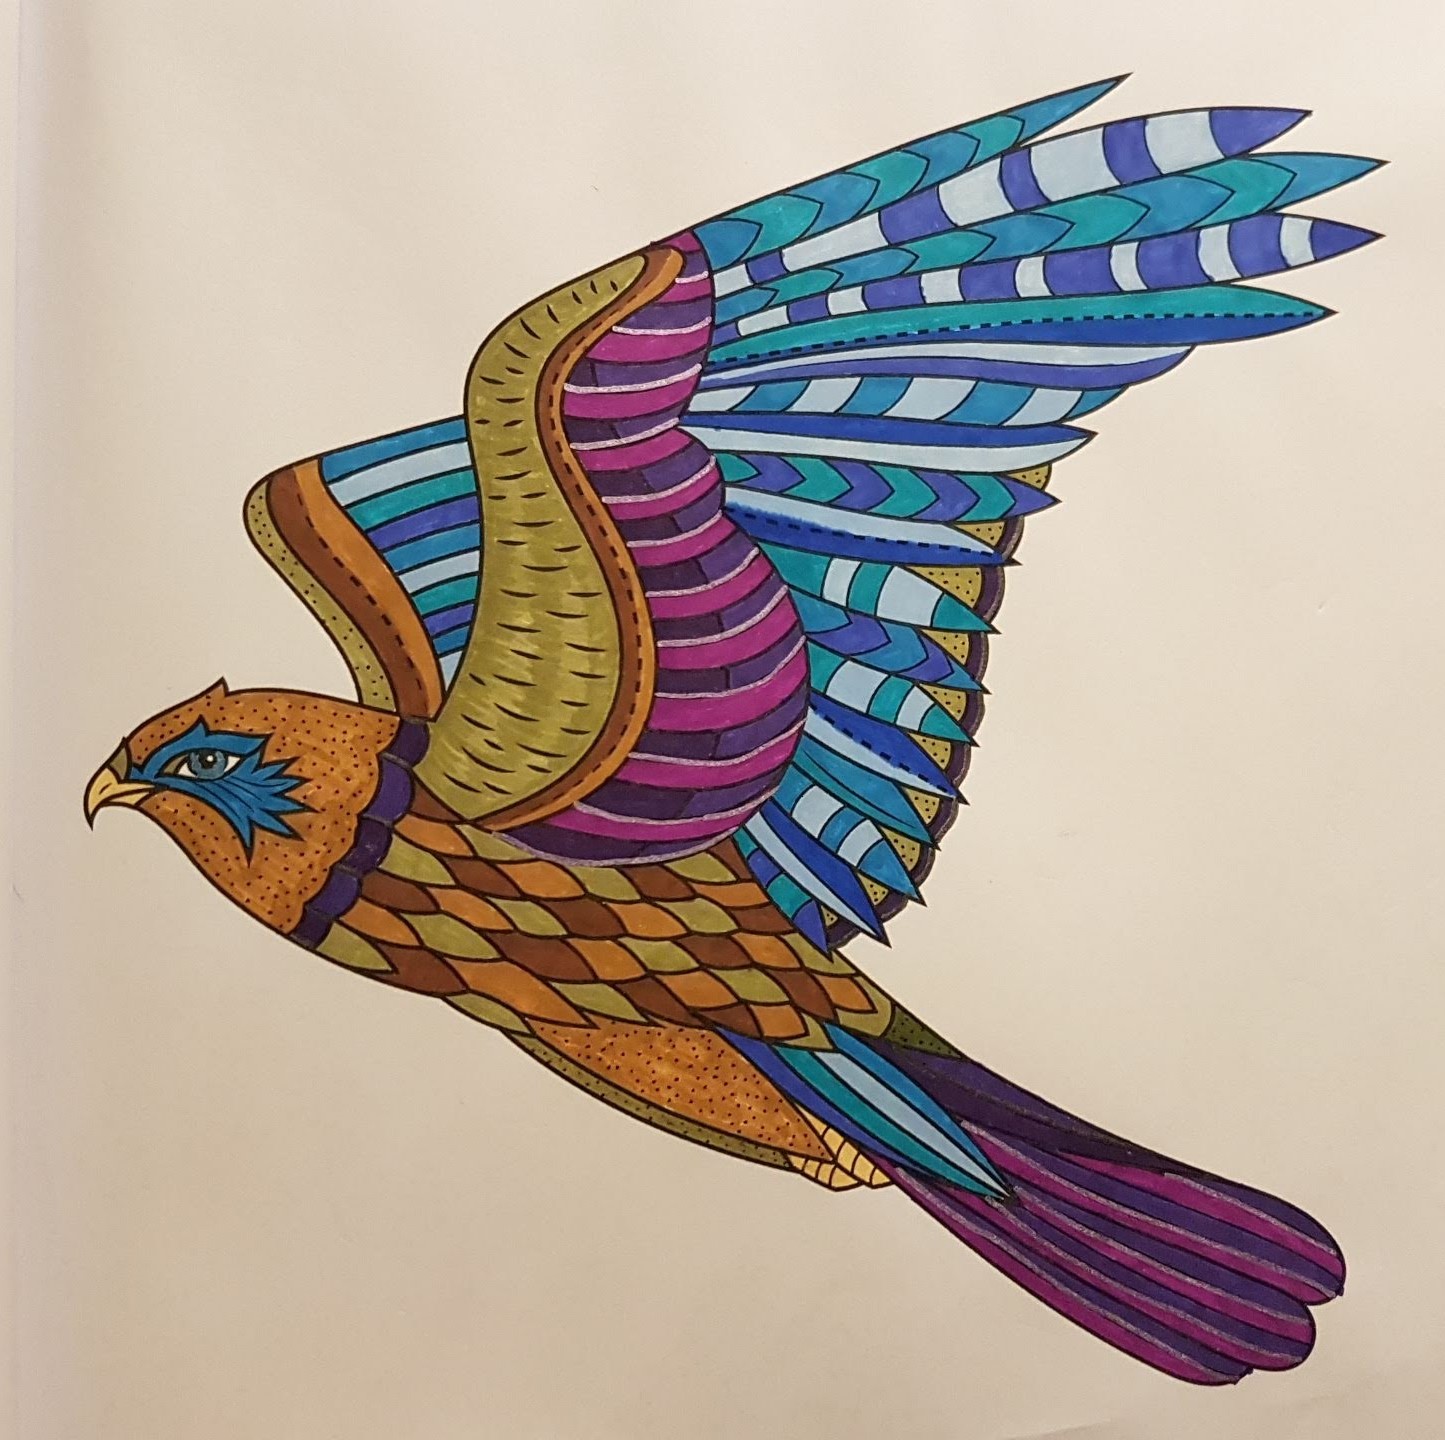 Falcon-like bird, flying towards the left, with brown body and purple & blue wing and tail feathers